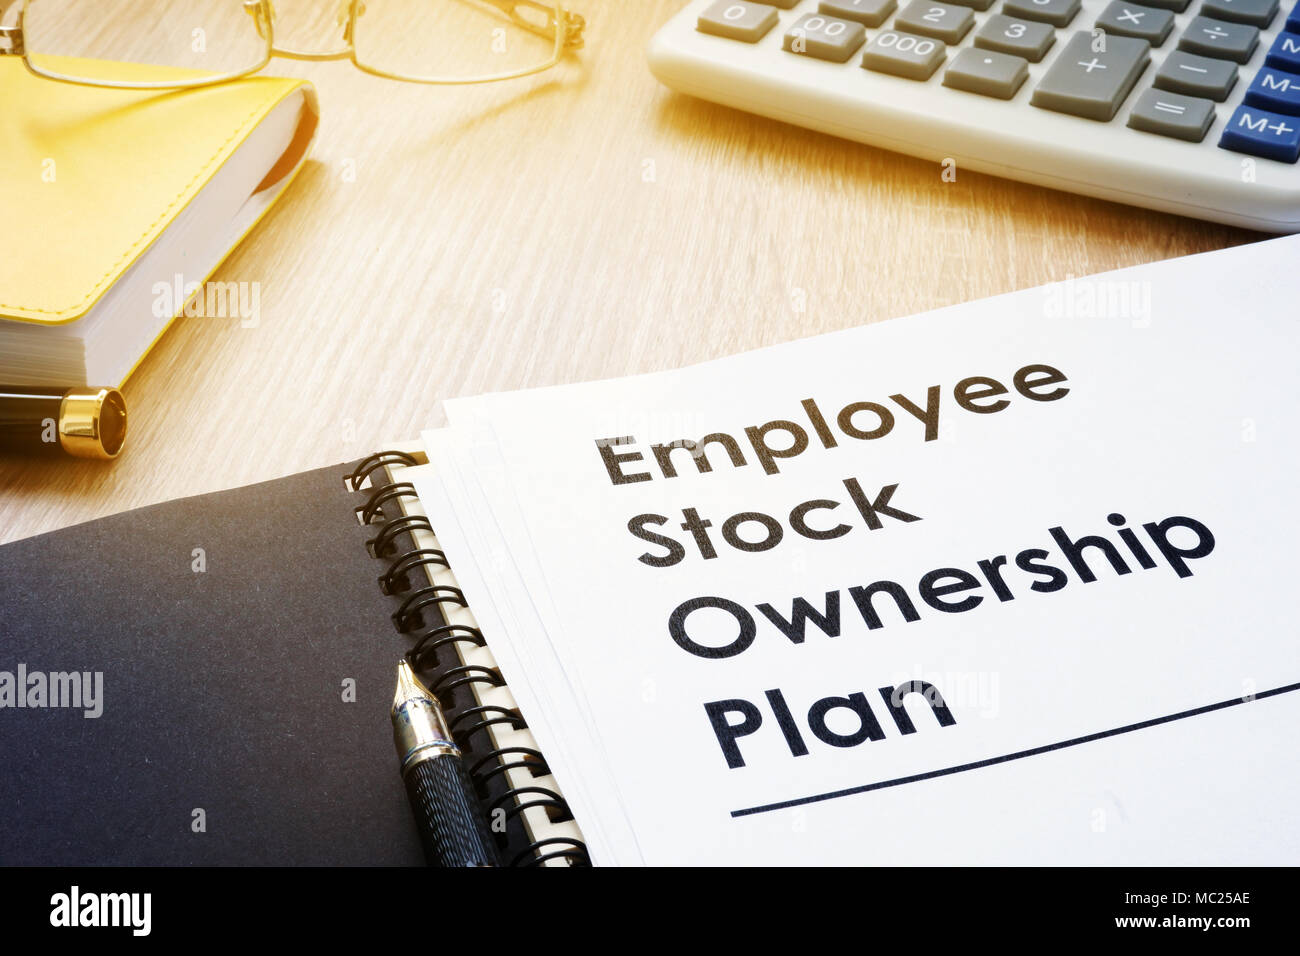 Documents with title employee stock ownership plans (ESOP). Stock Photo